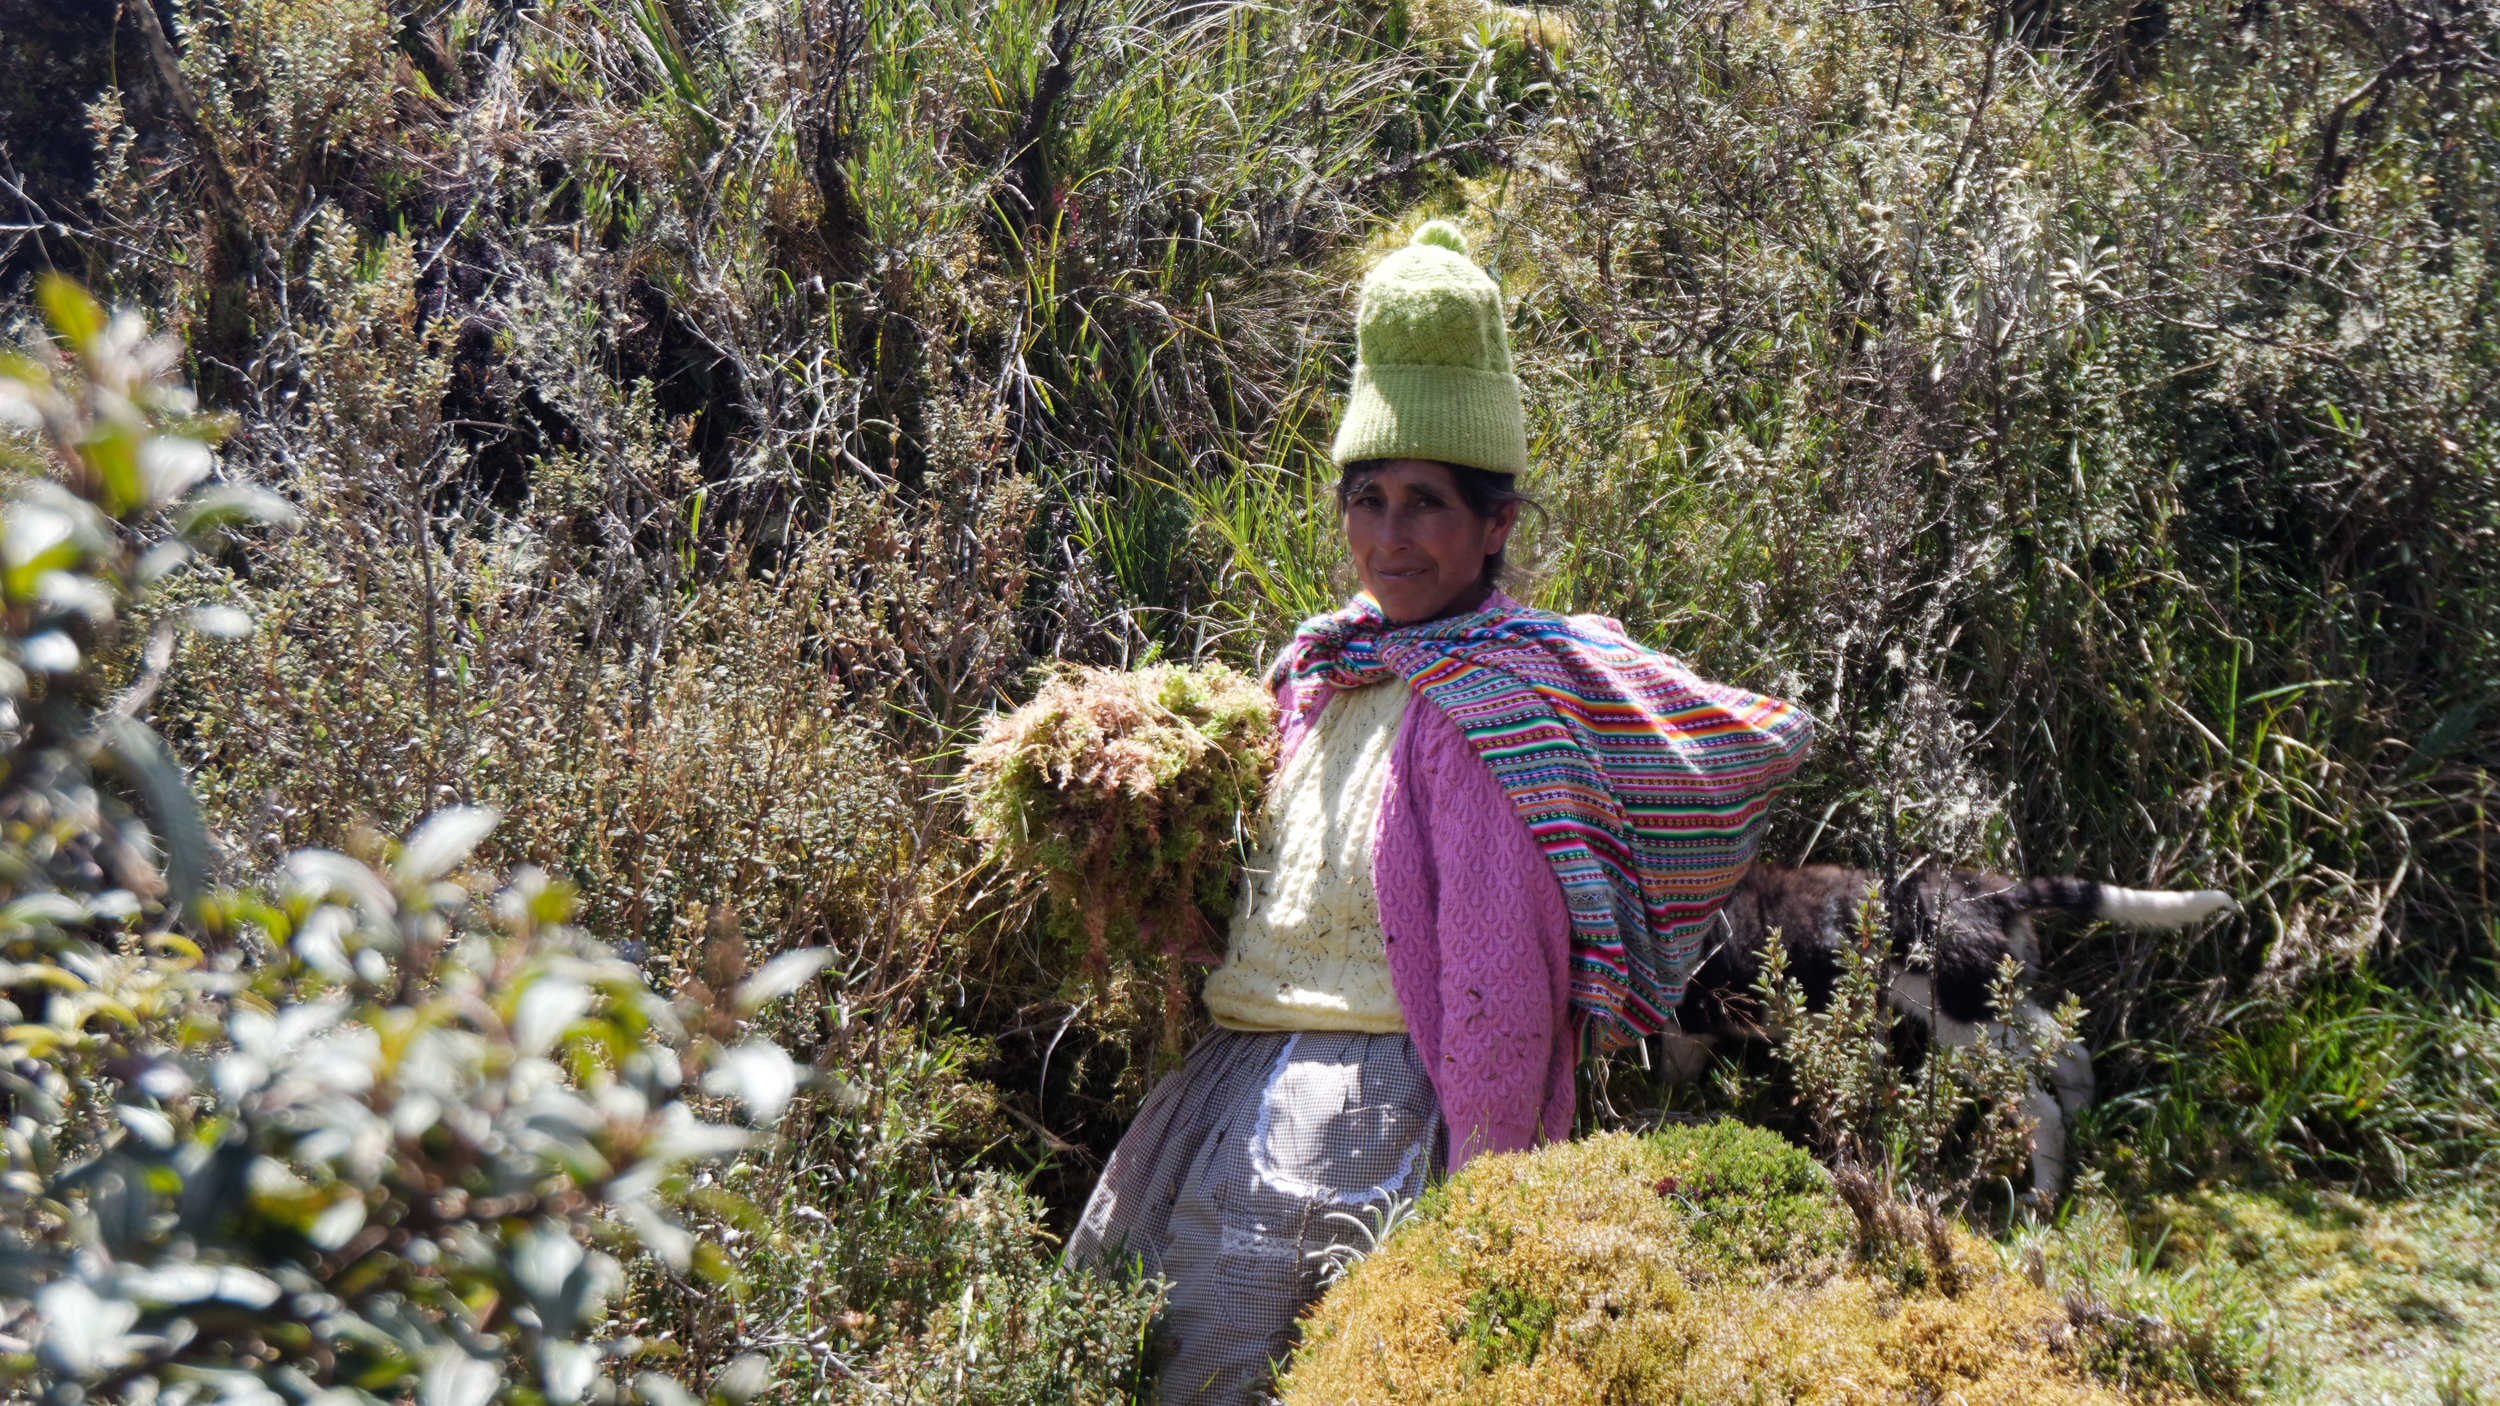 INKA MOSS  Farmers use solar technology to grow moss, overcoming the challenges posed by climate and market prices for more traditional products.